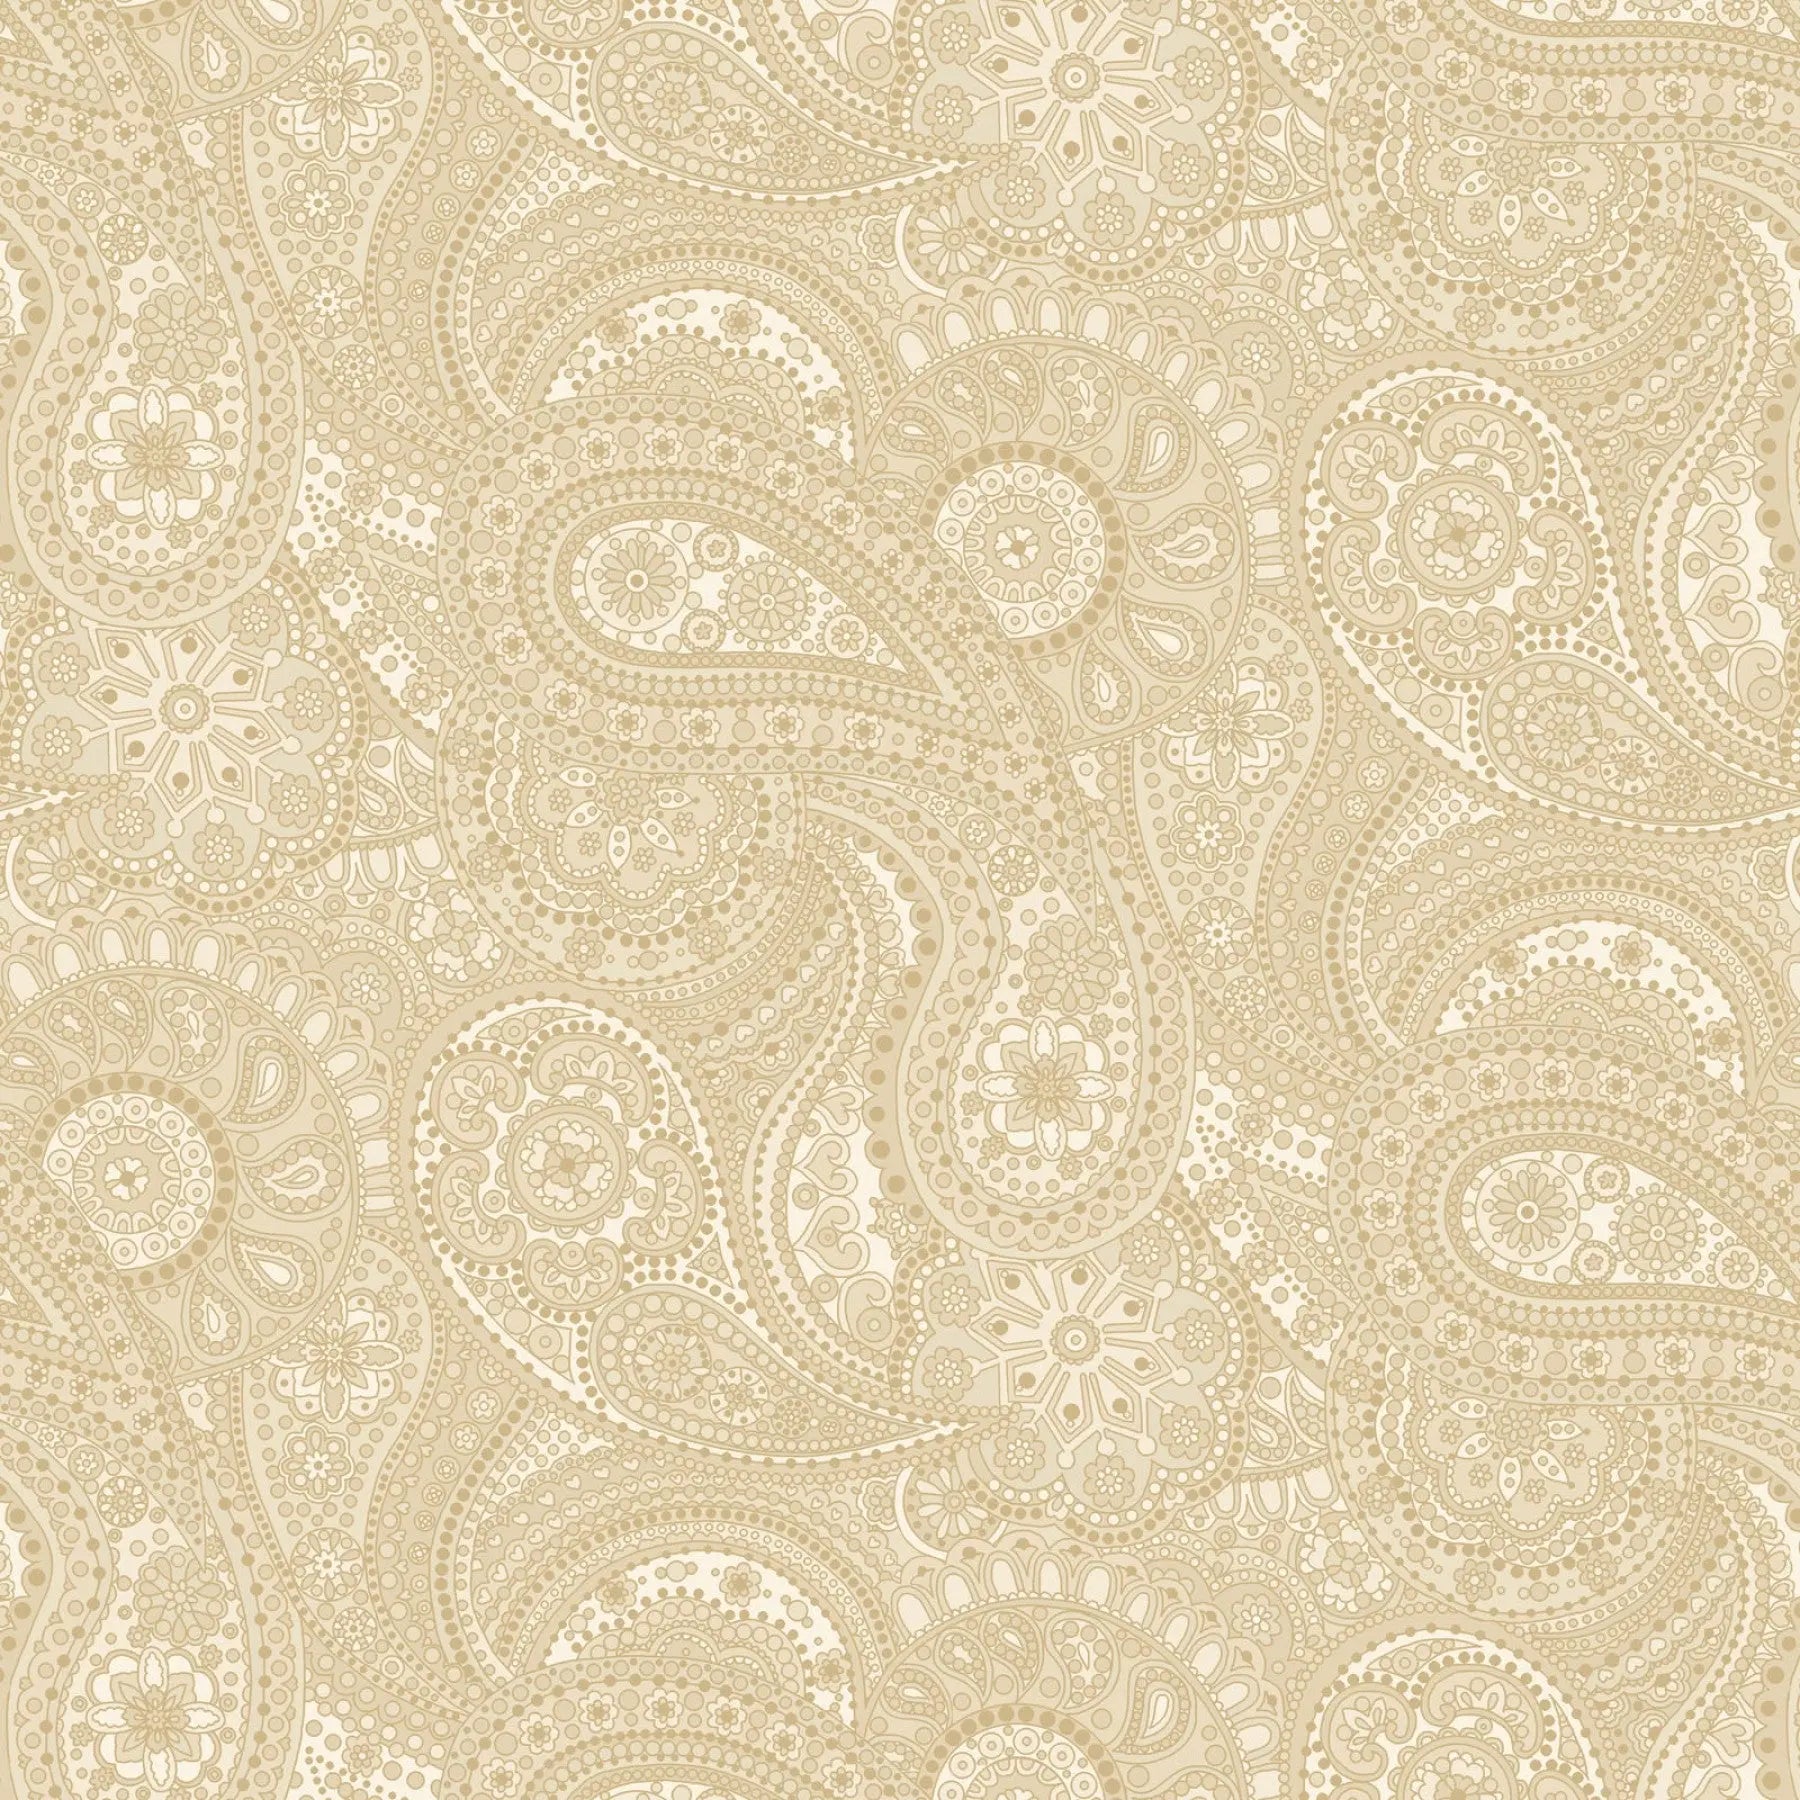 Beige Large Paisley Paradise Wideback Fabric per yard - Linda's Electric Quilters